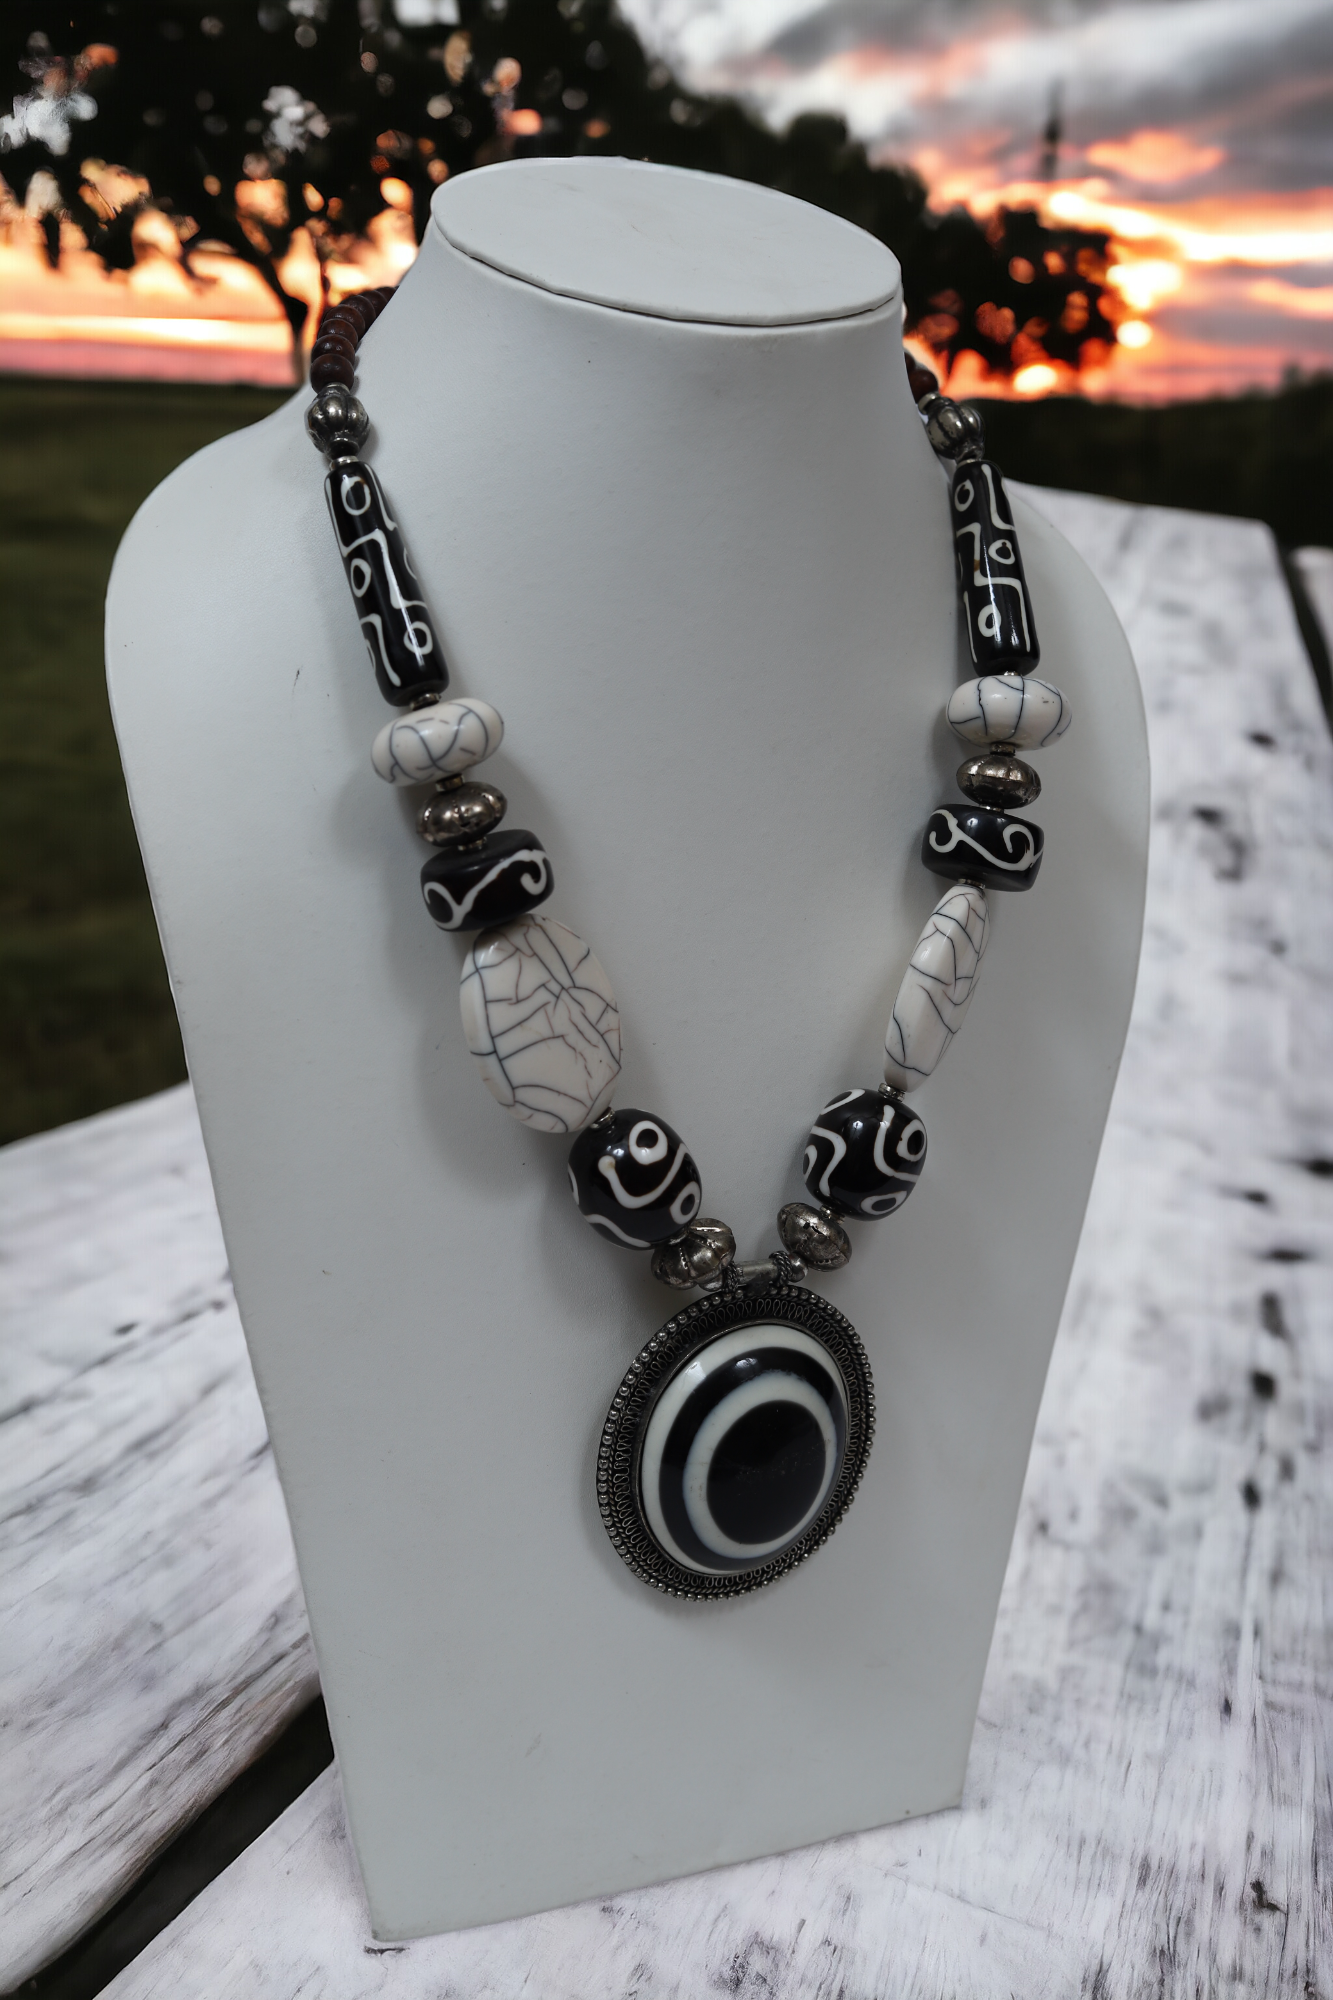 Black And White Pendant Necklace